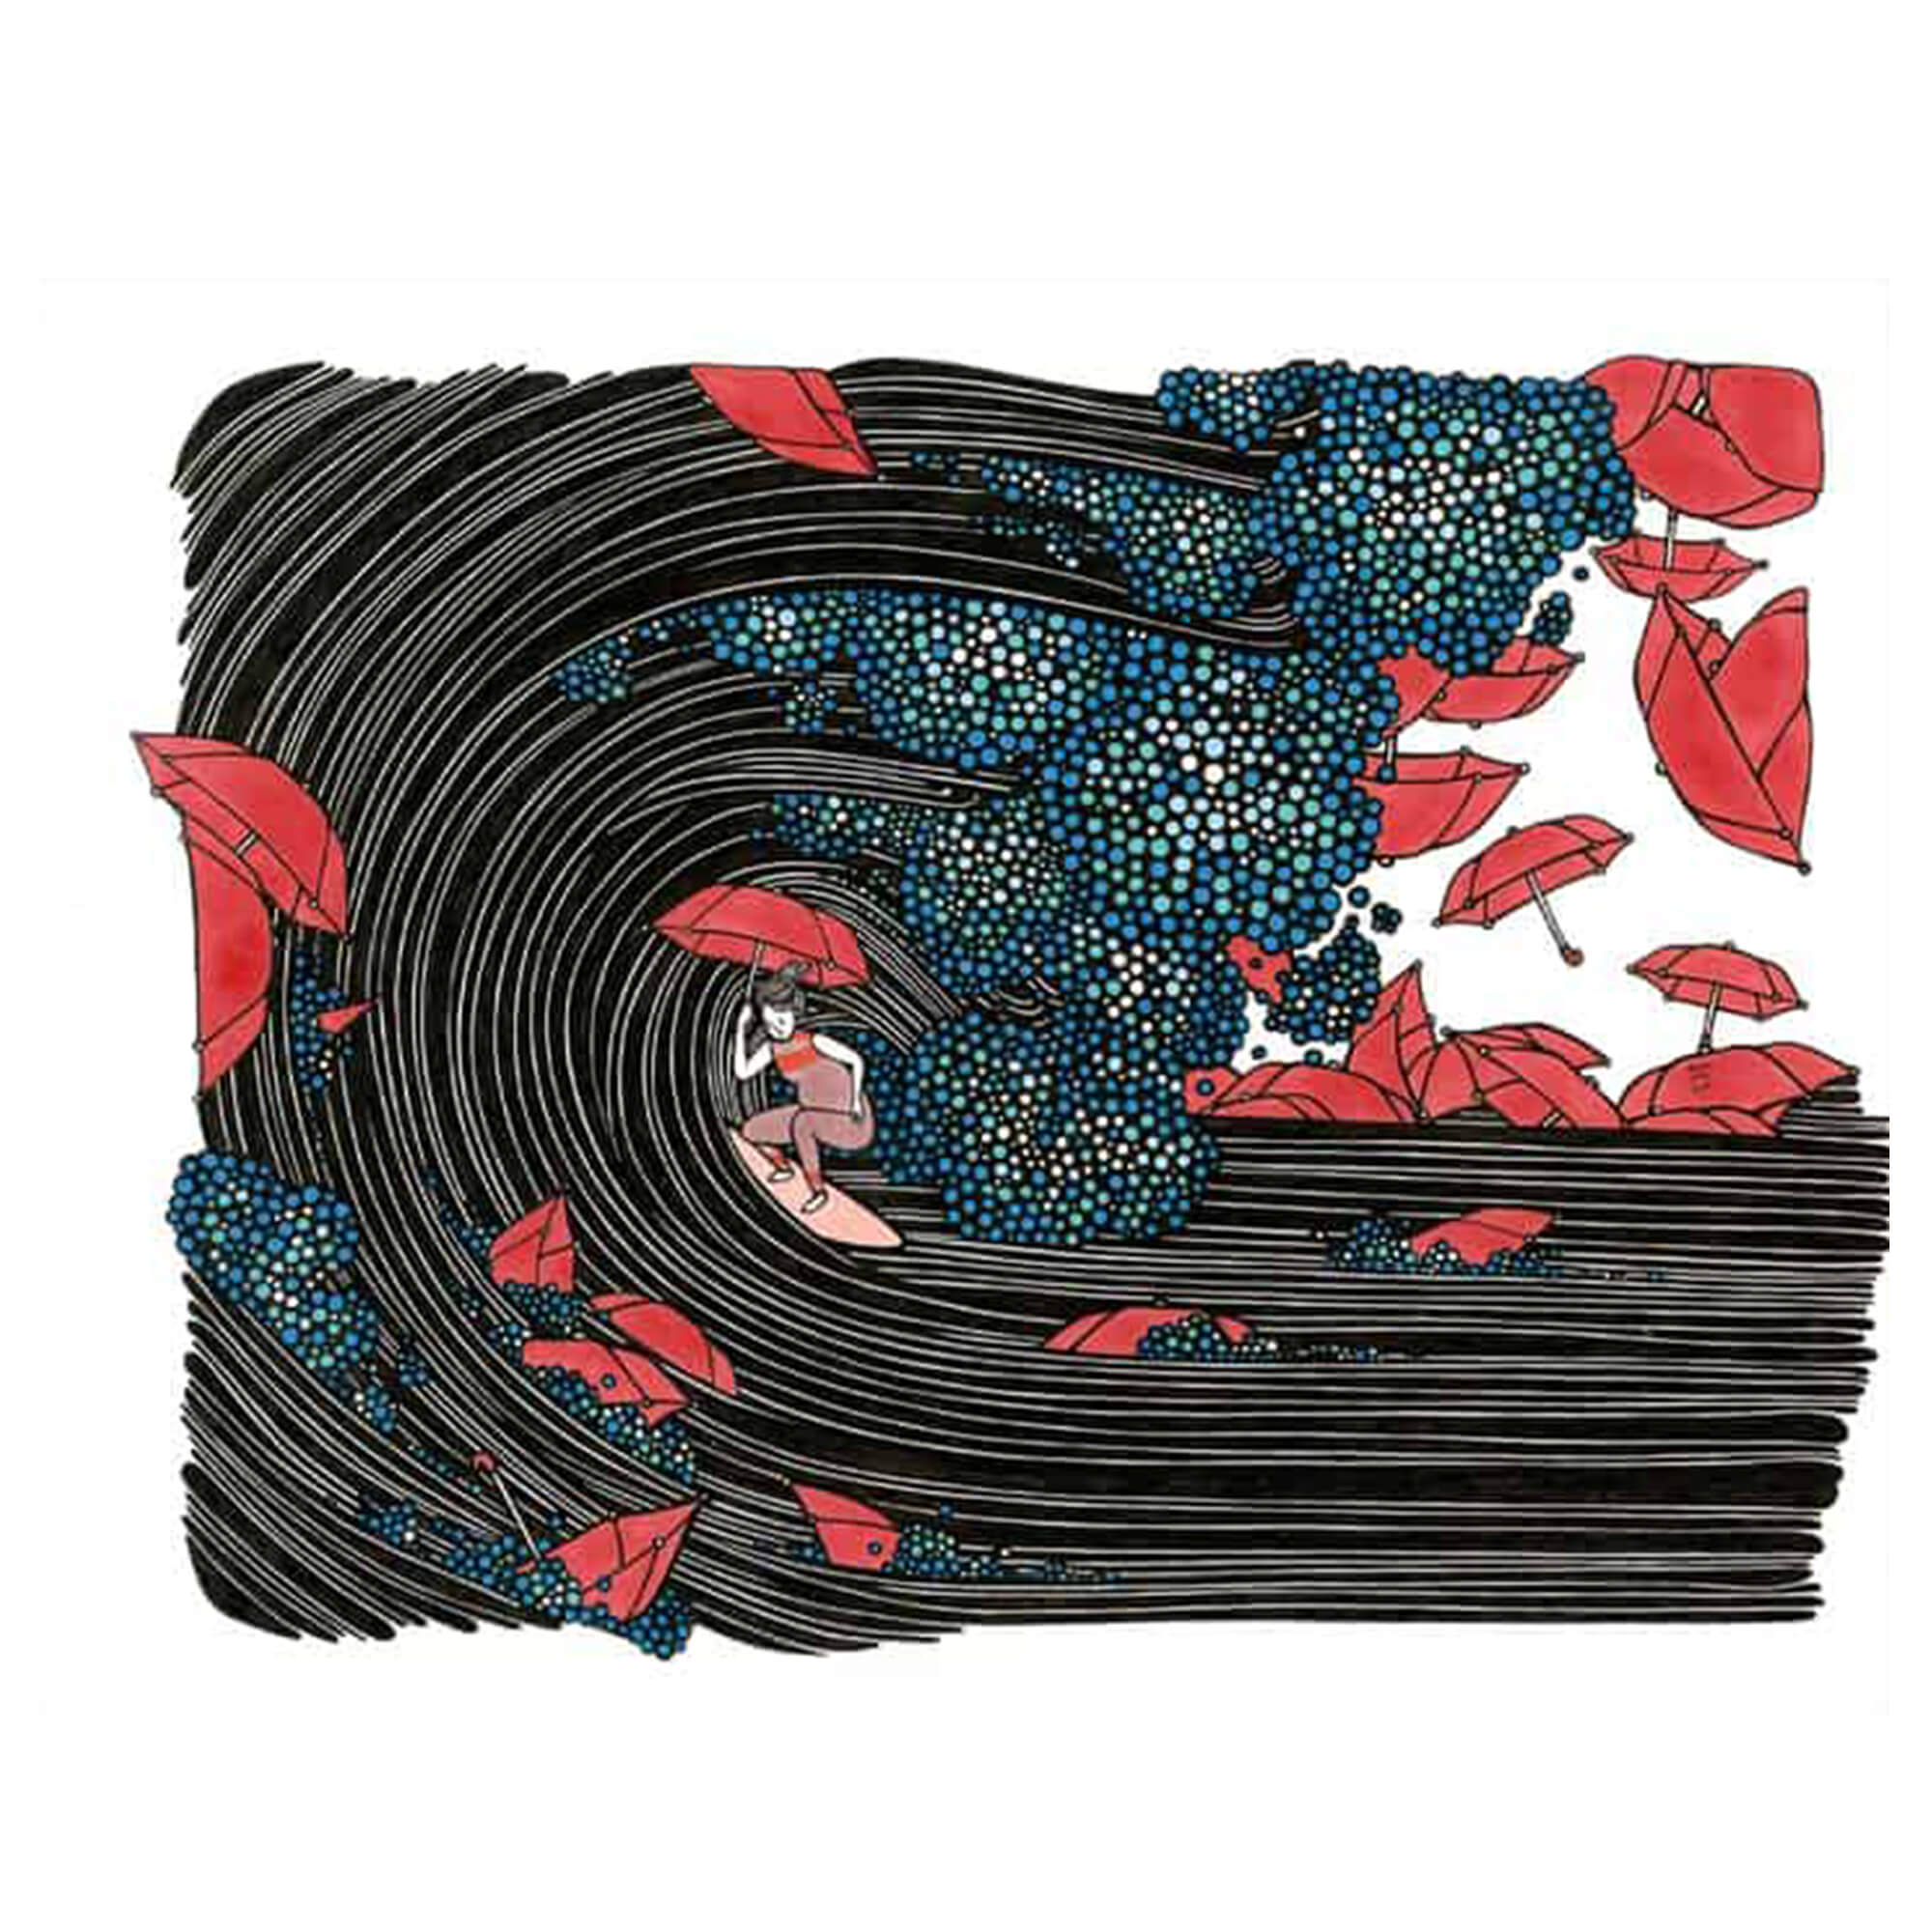 A matted art print of a woman surfing a massive, black ink wave scattered with red umbrellas by Hawaii artist Kris Goto